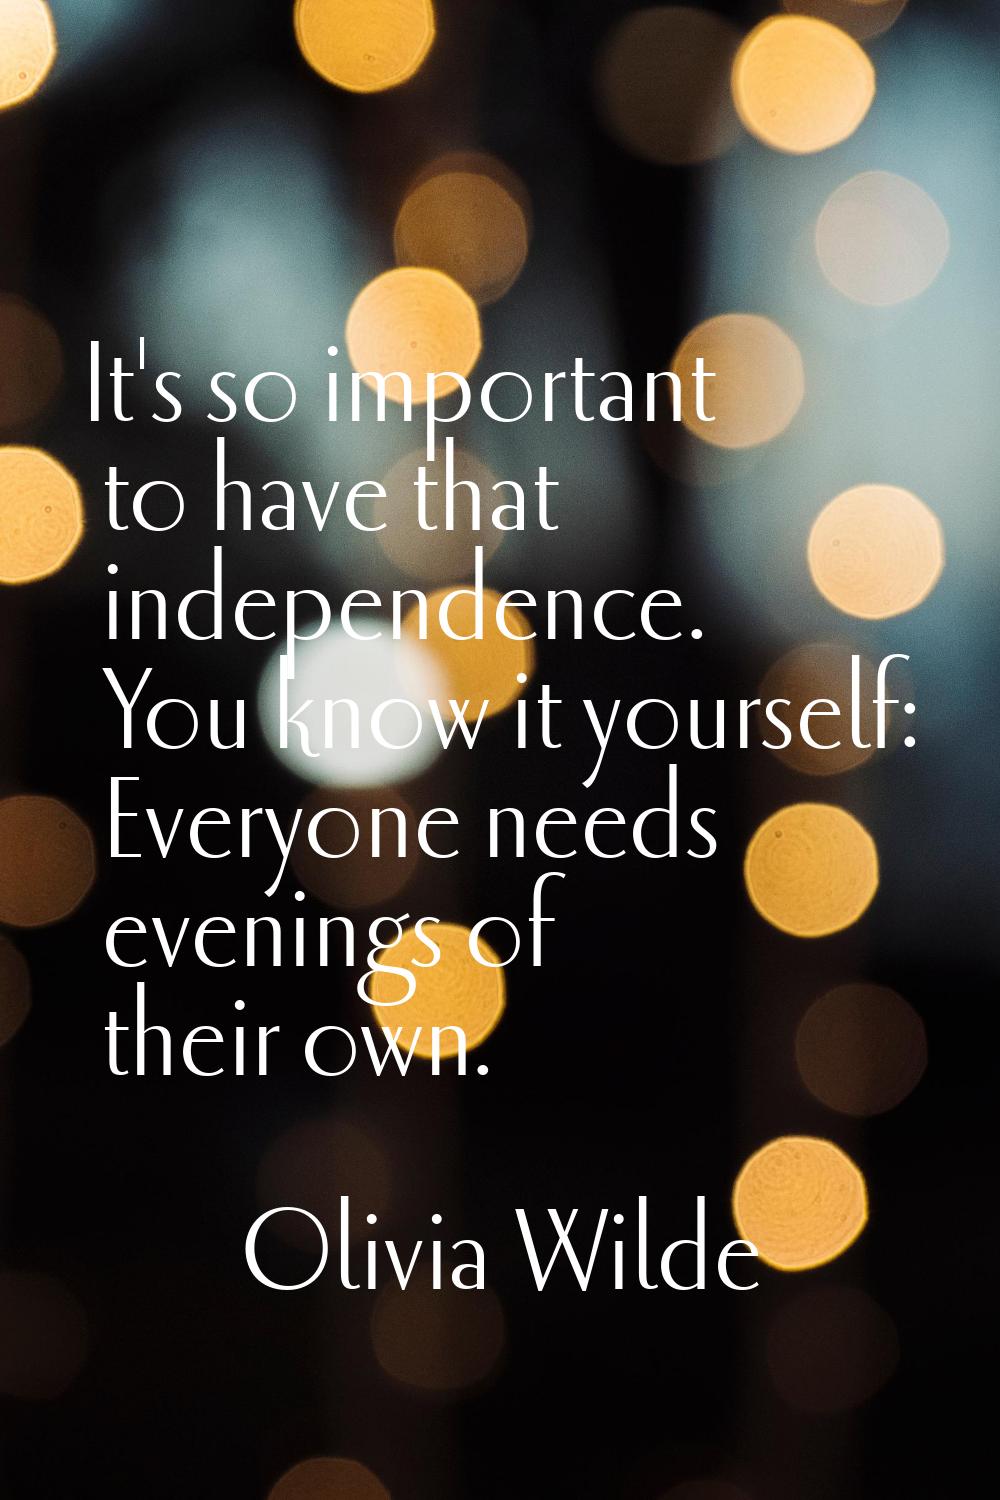 It's so important to have that independence. You know it yourself: Everyone needs evenings of their